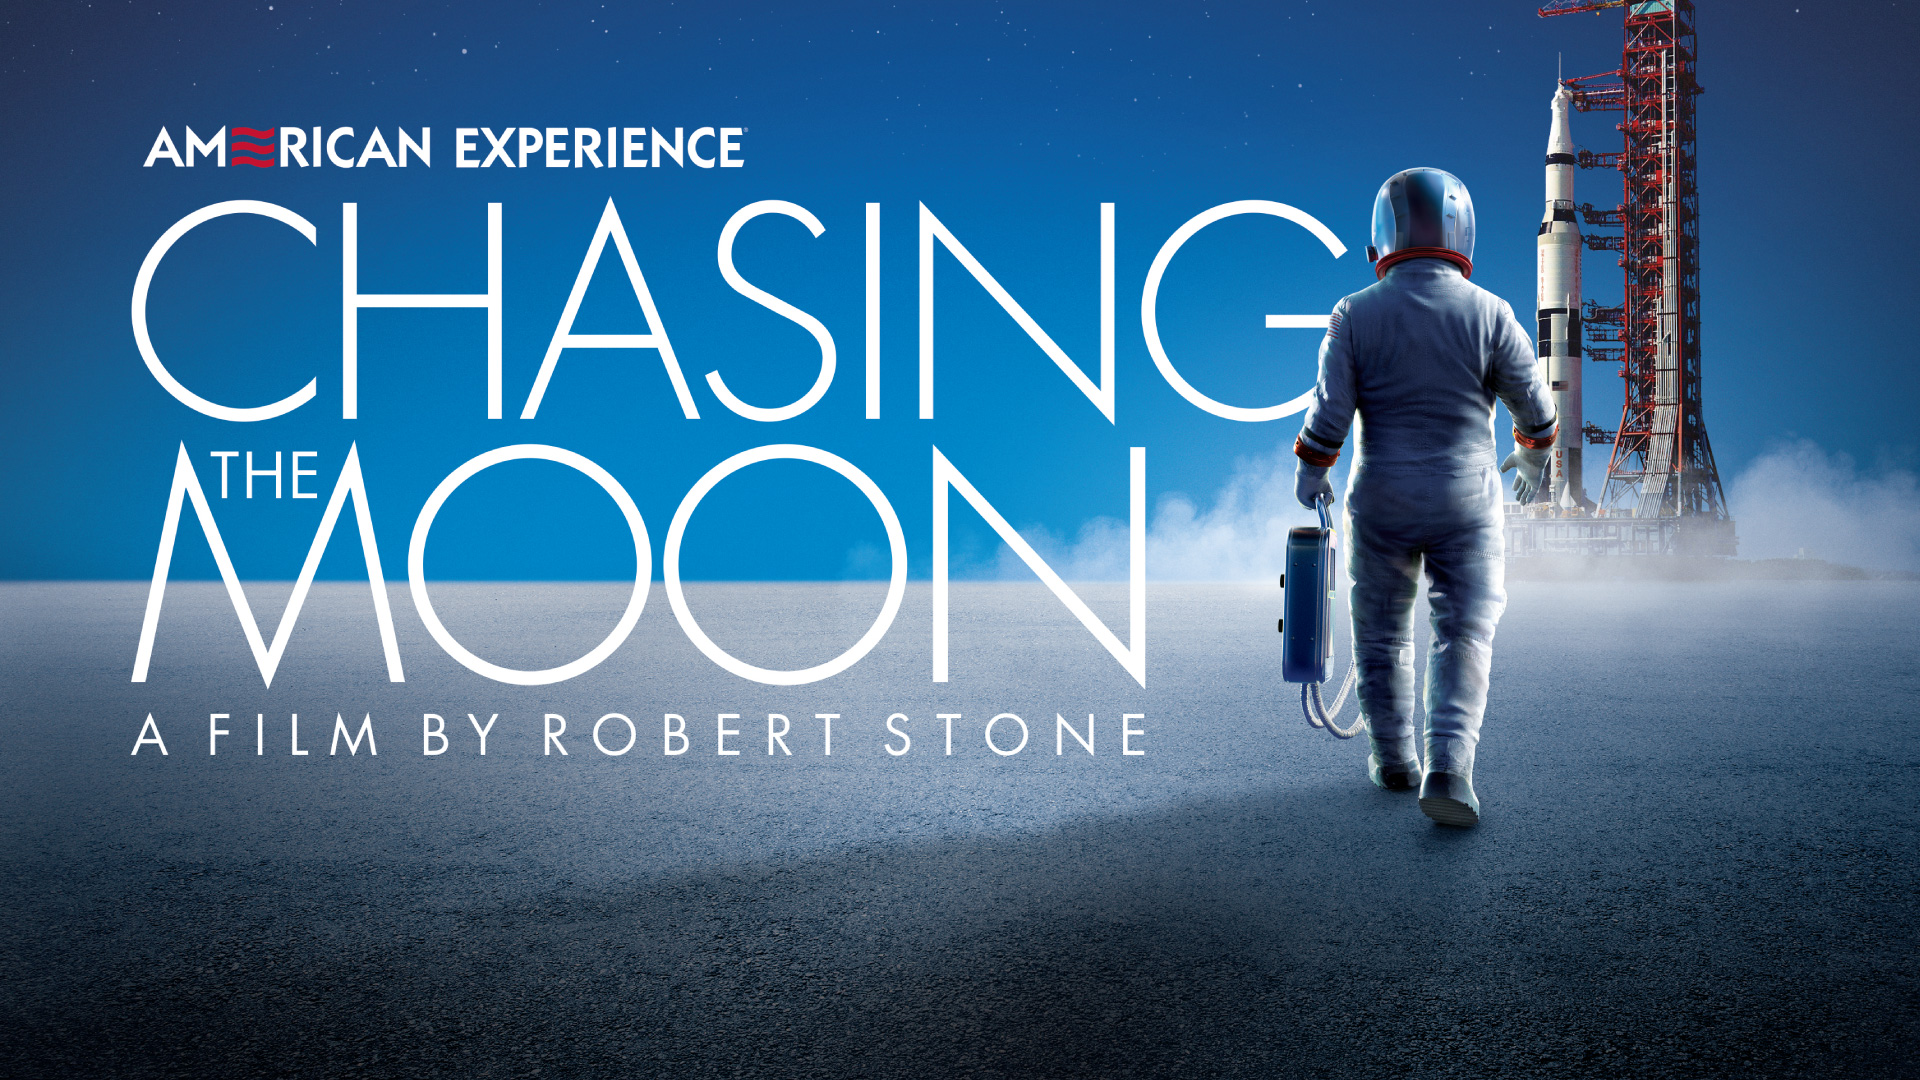 Chasing the Moon: A film by Robert Stone